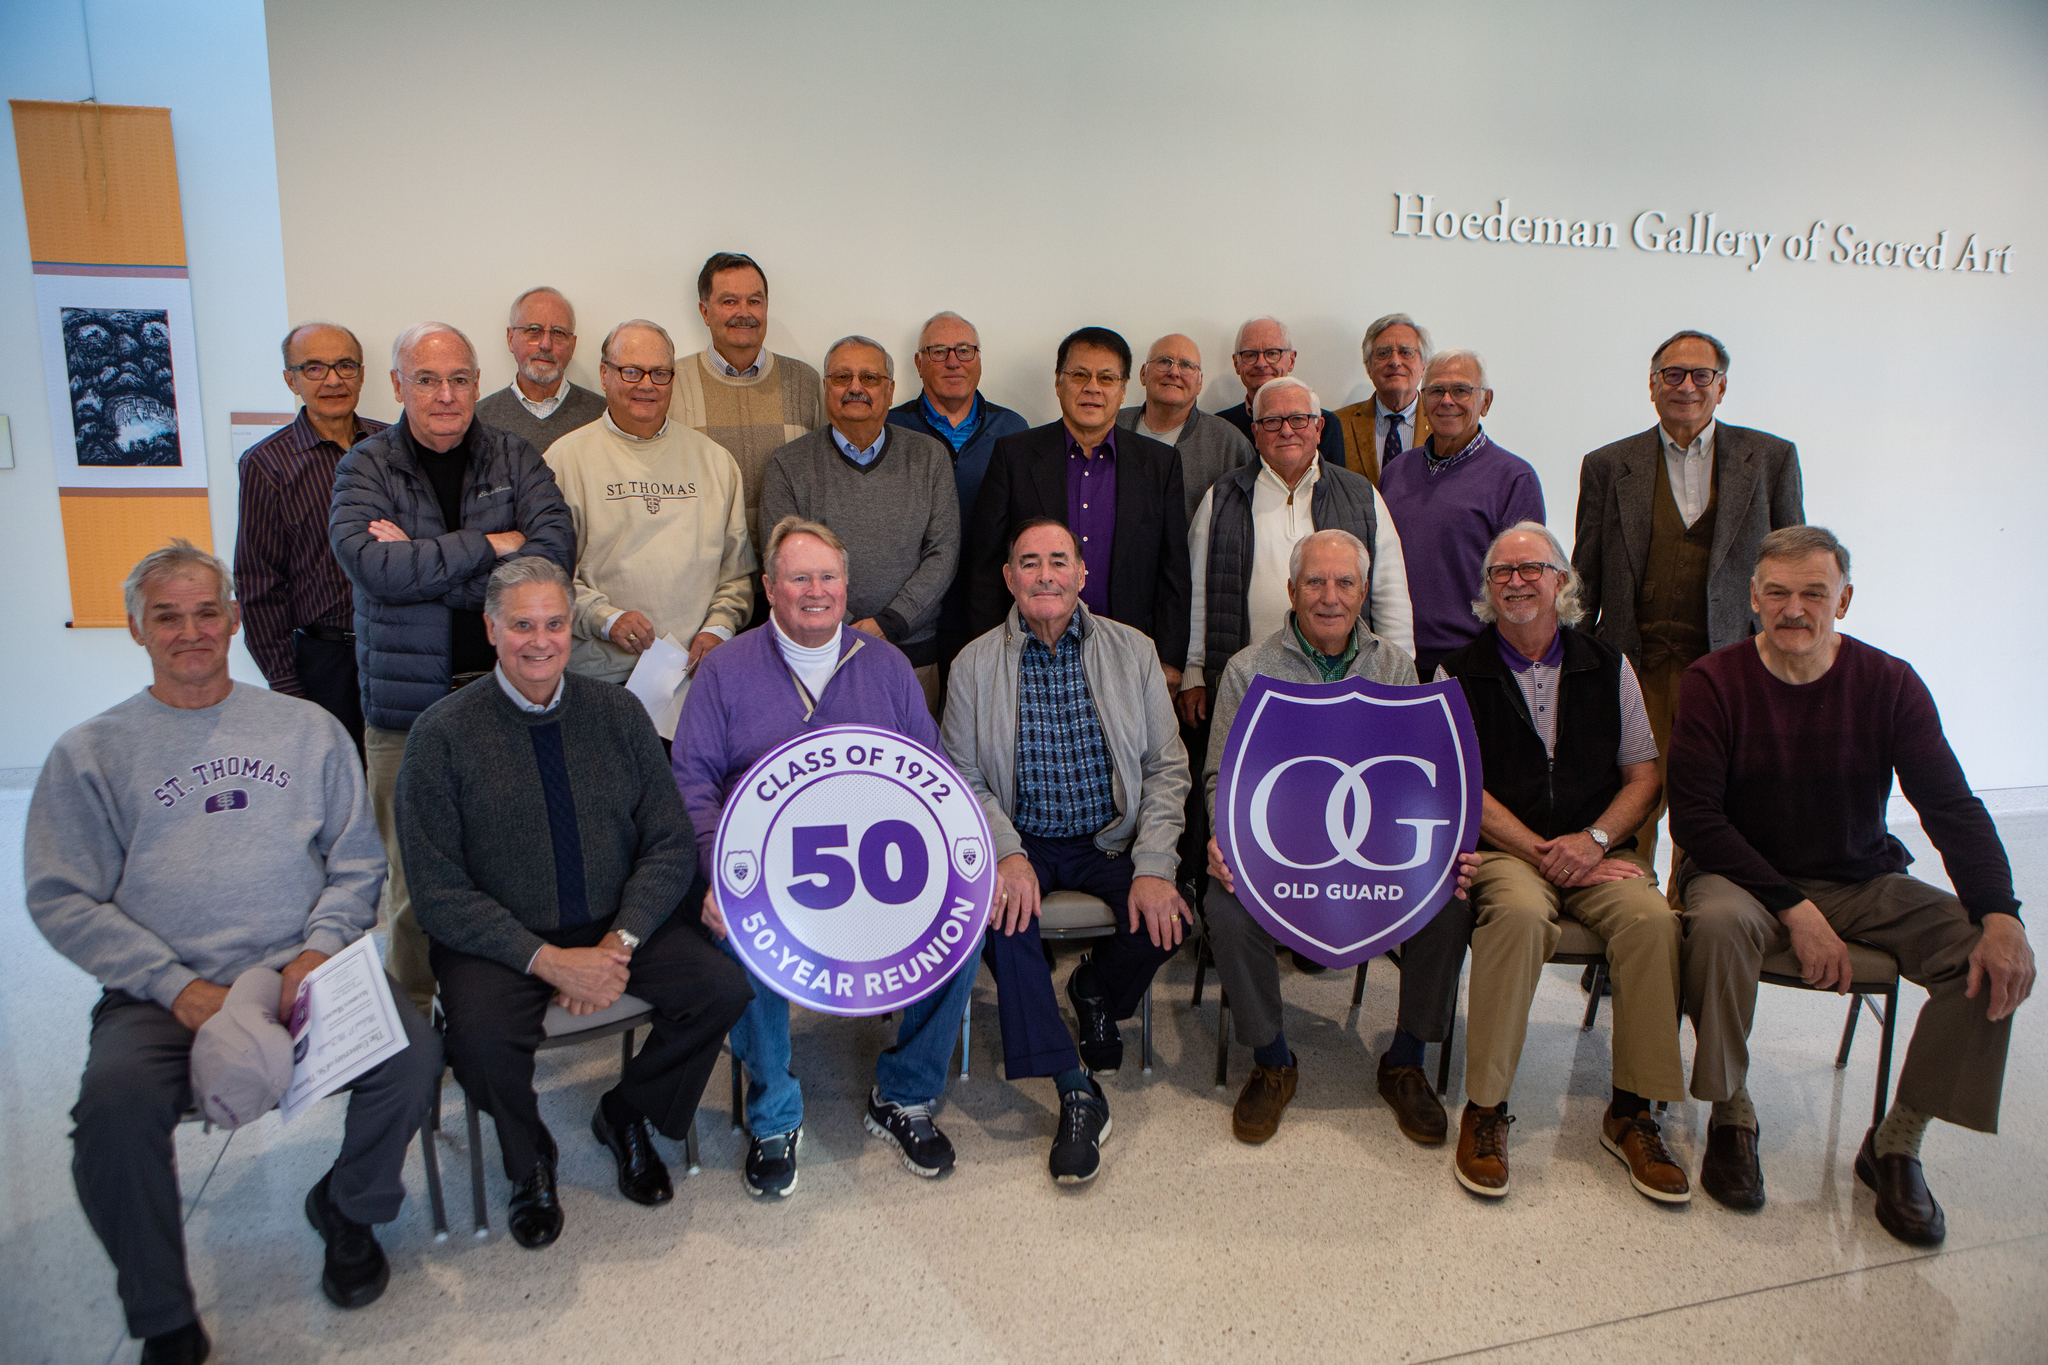  University of St. Thomas Old Guard Reunion in October 2022